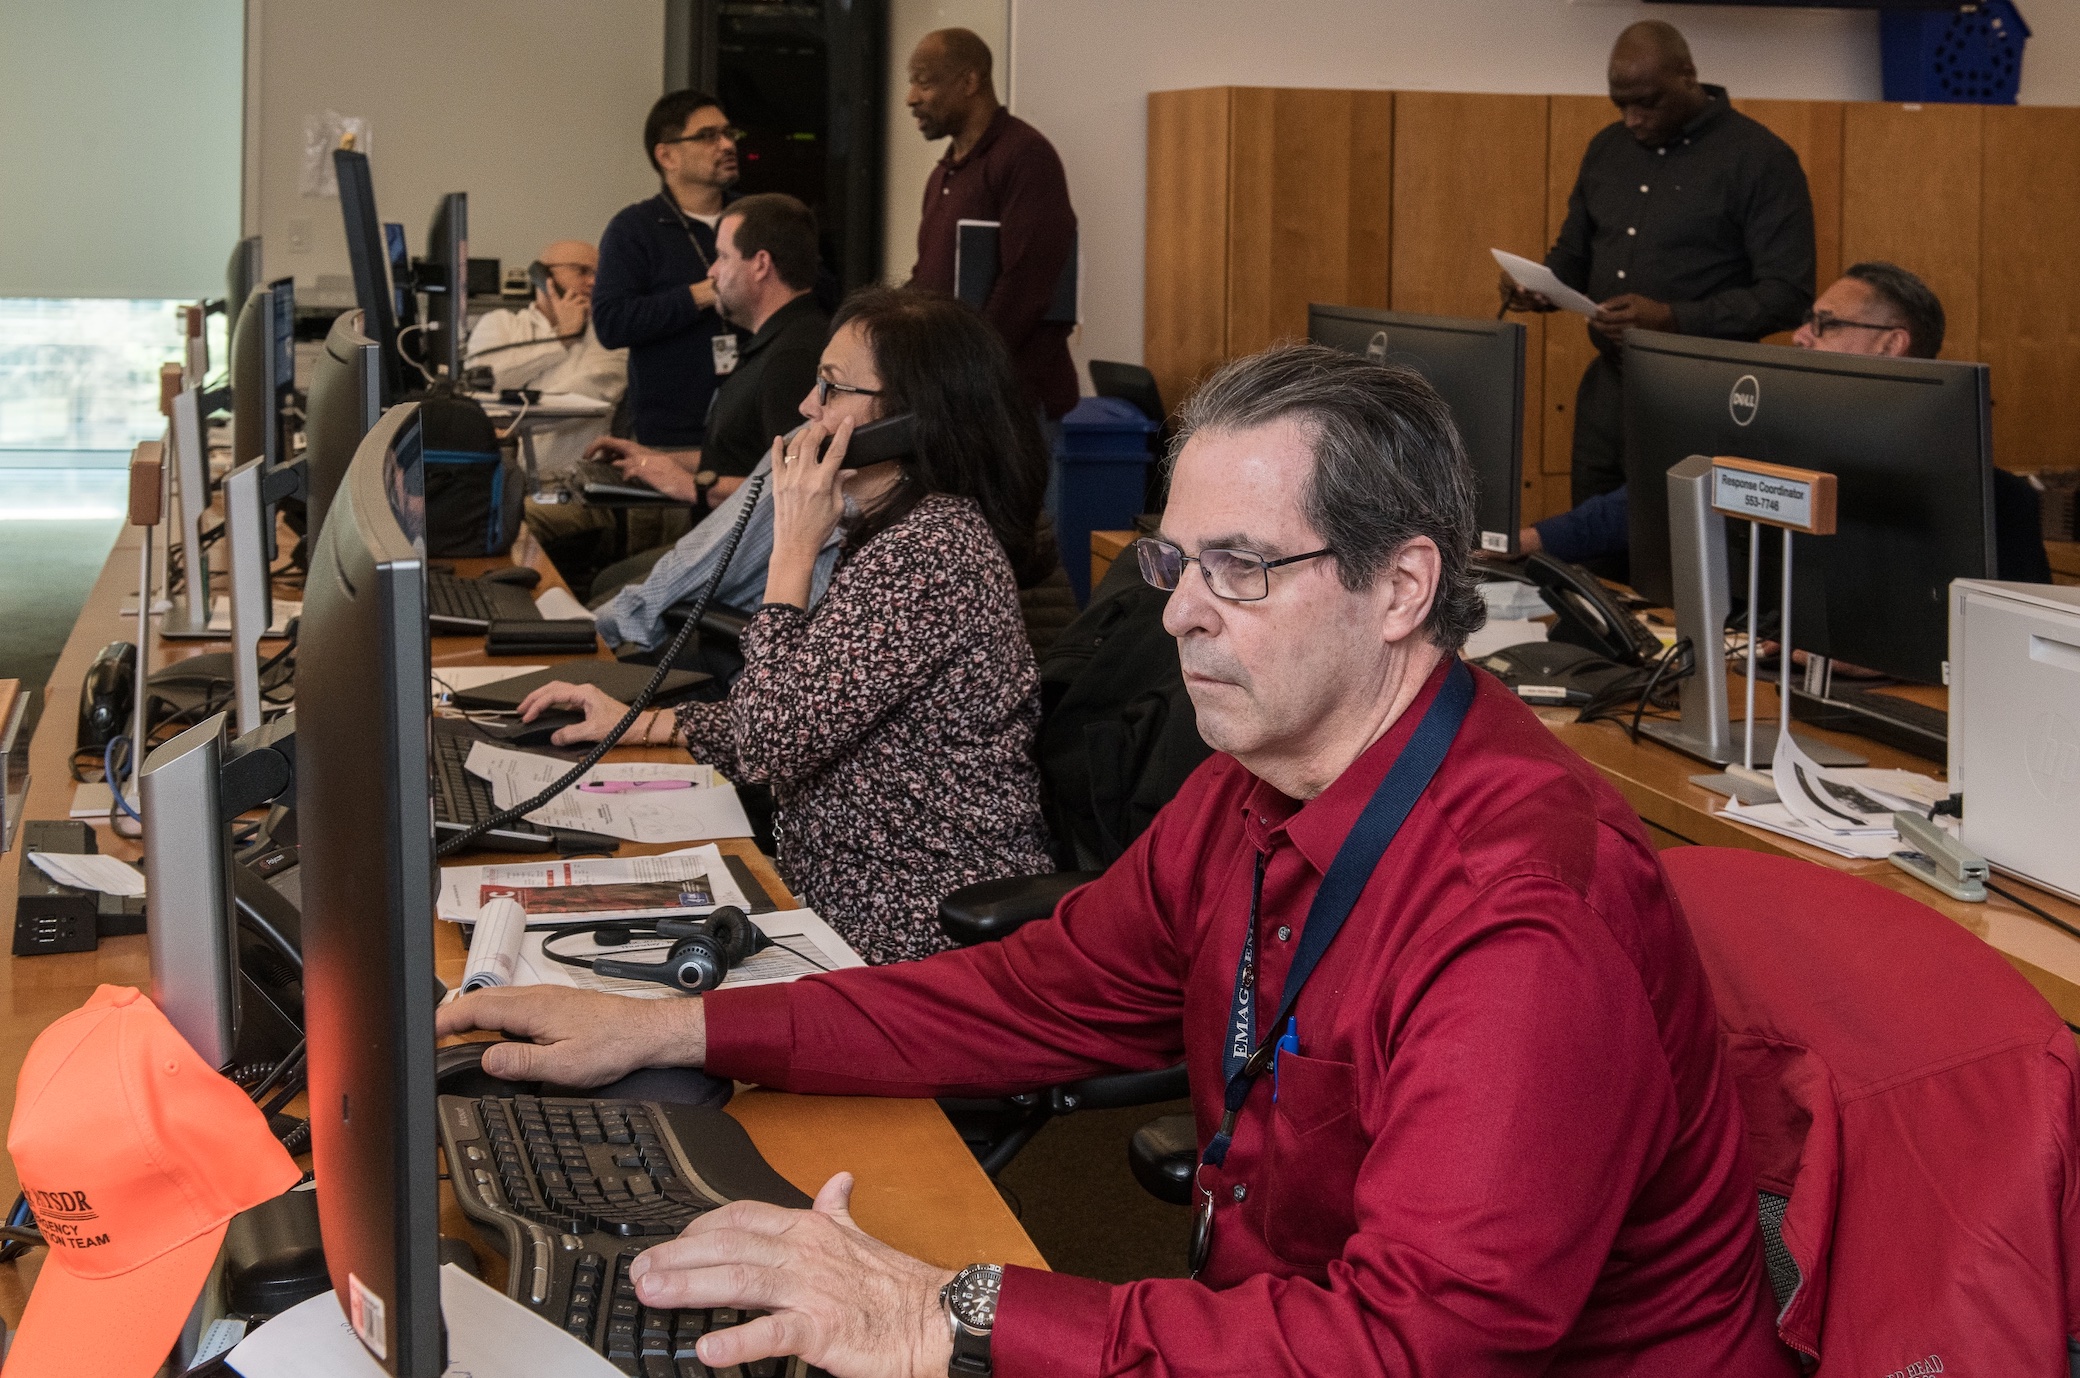 The Centers for Disease Control and Prevention (CDC) Emergency Operations Center (EOC) staff is hard at work keeping Americans safe 24/7. Image by CDC, via Unsplash.com.